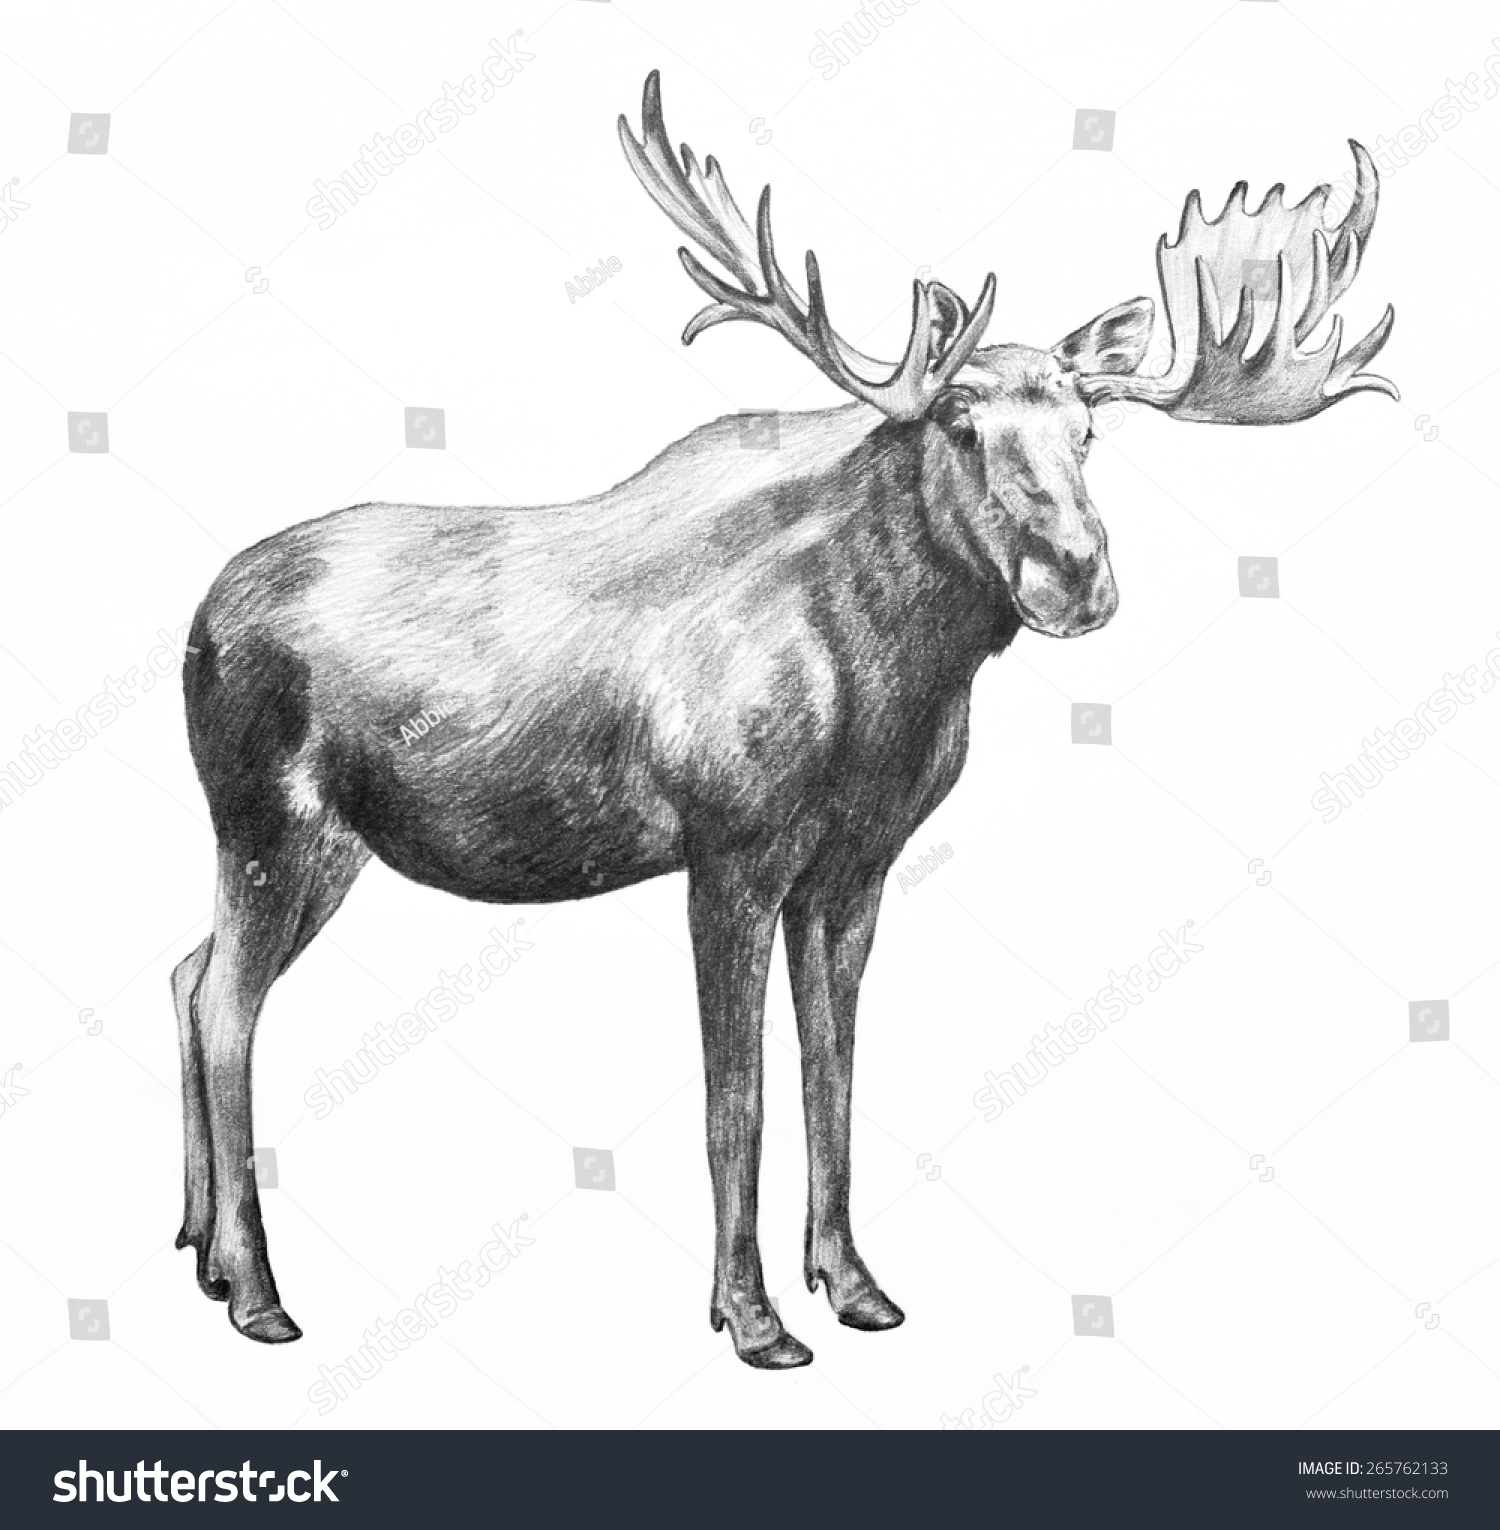 Moose Illustration. Hand Drawn Moose Pencil Sketch Isolated On White